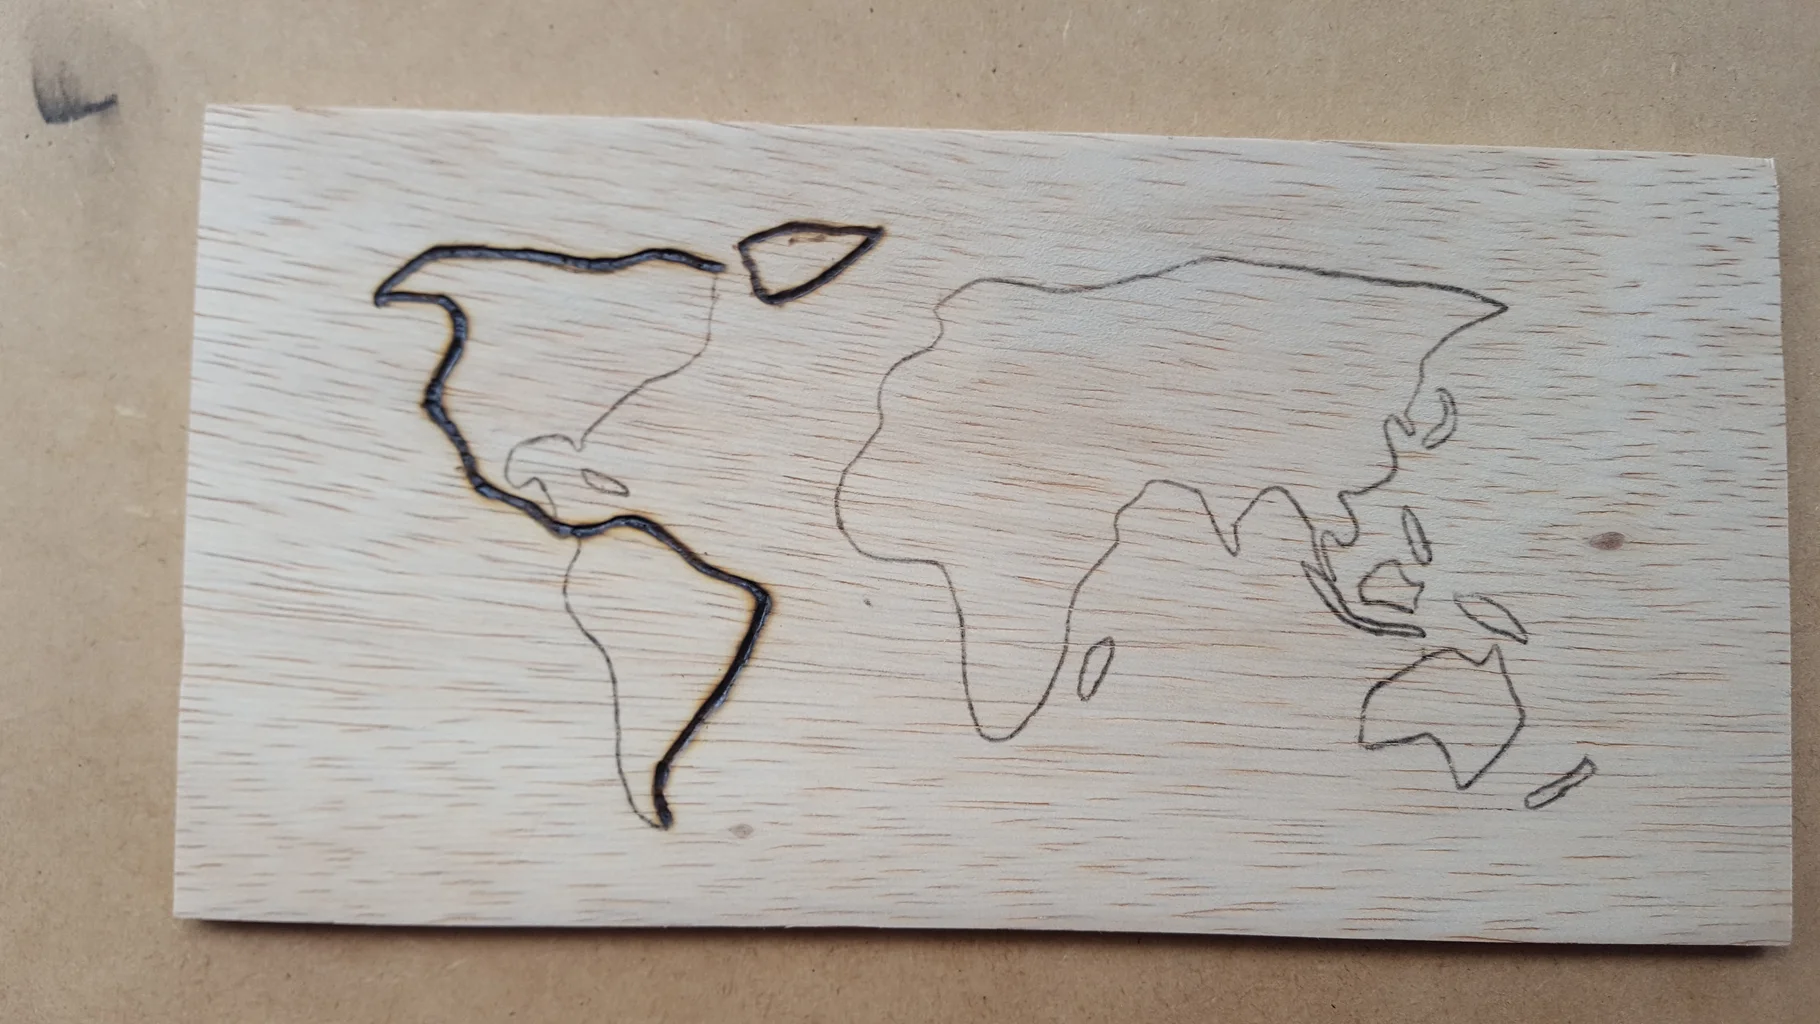 How to burn wood art ? Beginning Pyrography in 11 Easy Steps